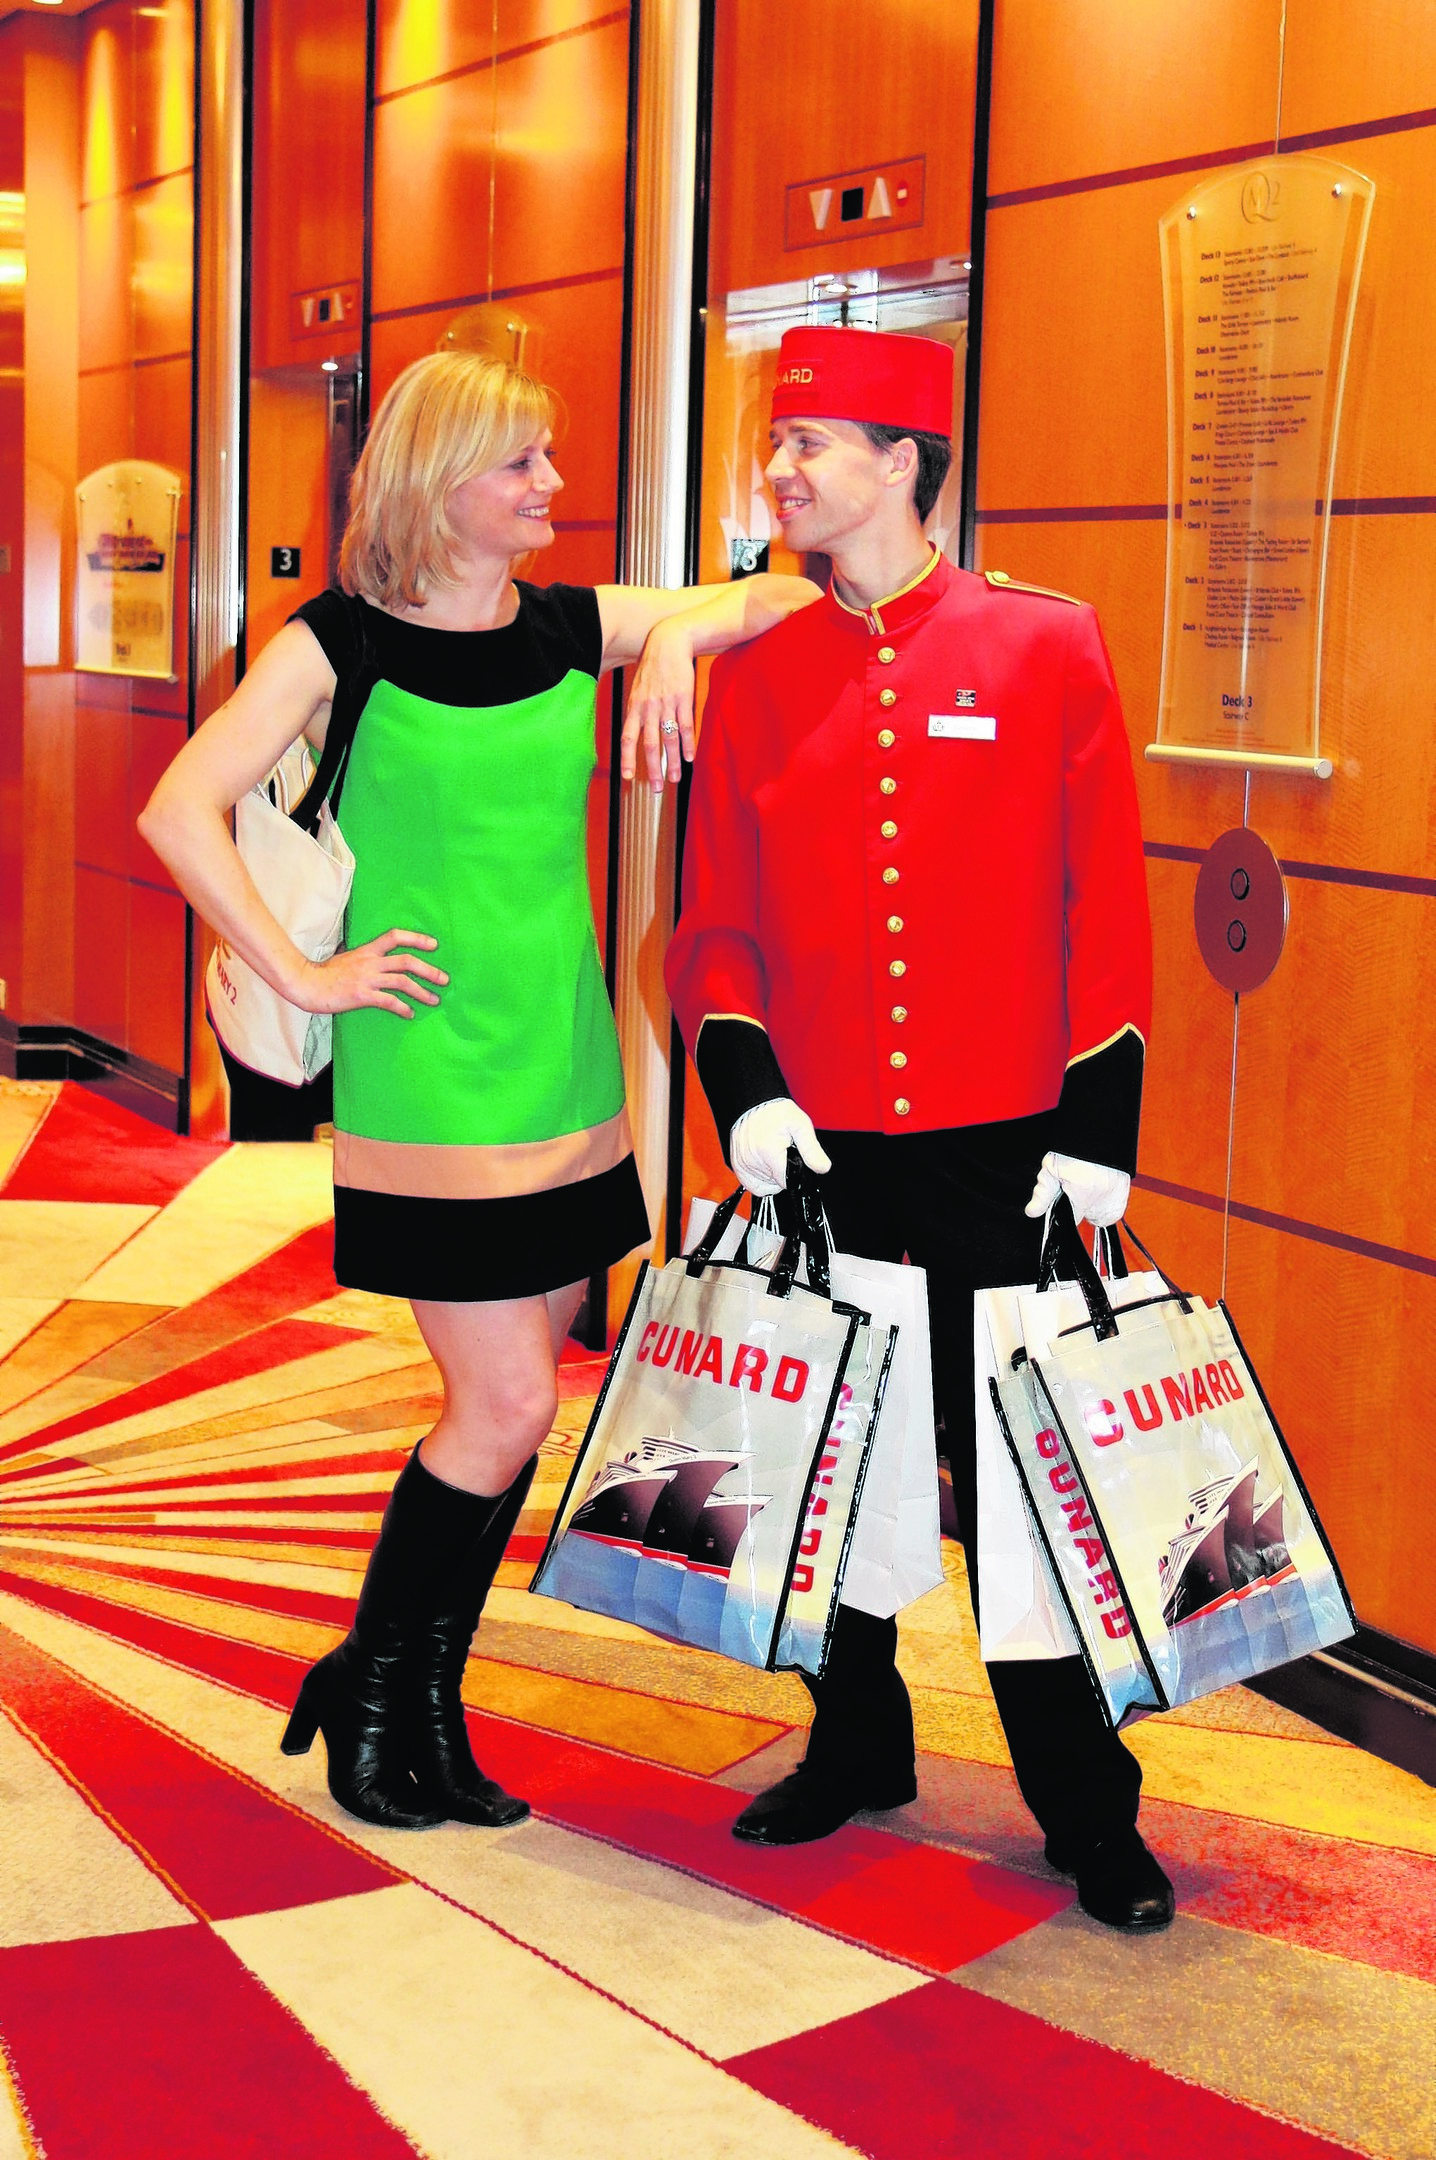 Karen and a bellboy on the Queen Mary 2